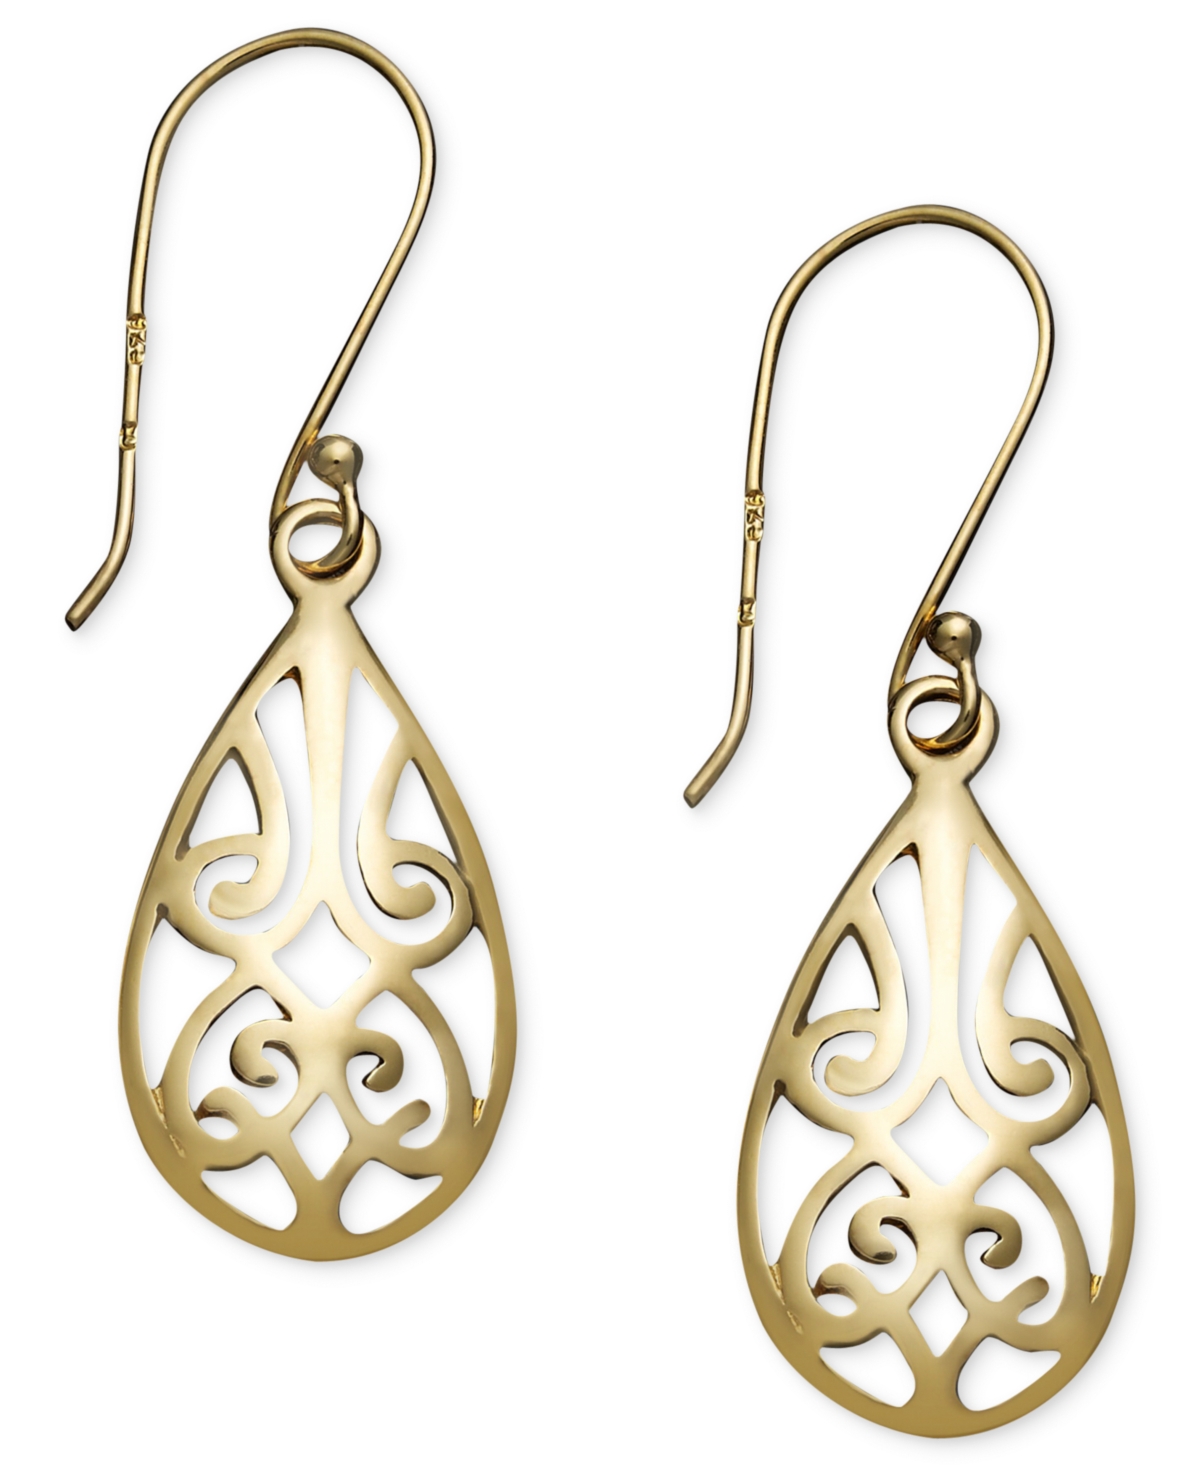 Giani Bernini Filigree Teardrop Earrings in 18k Gold over Sterling Silver and or Sterling Silver - Gold